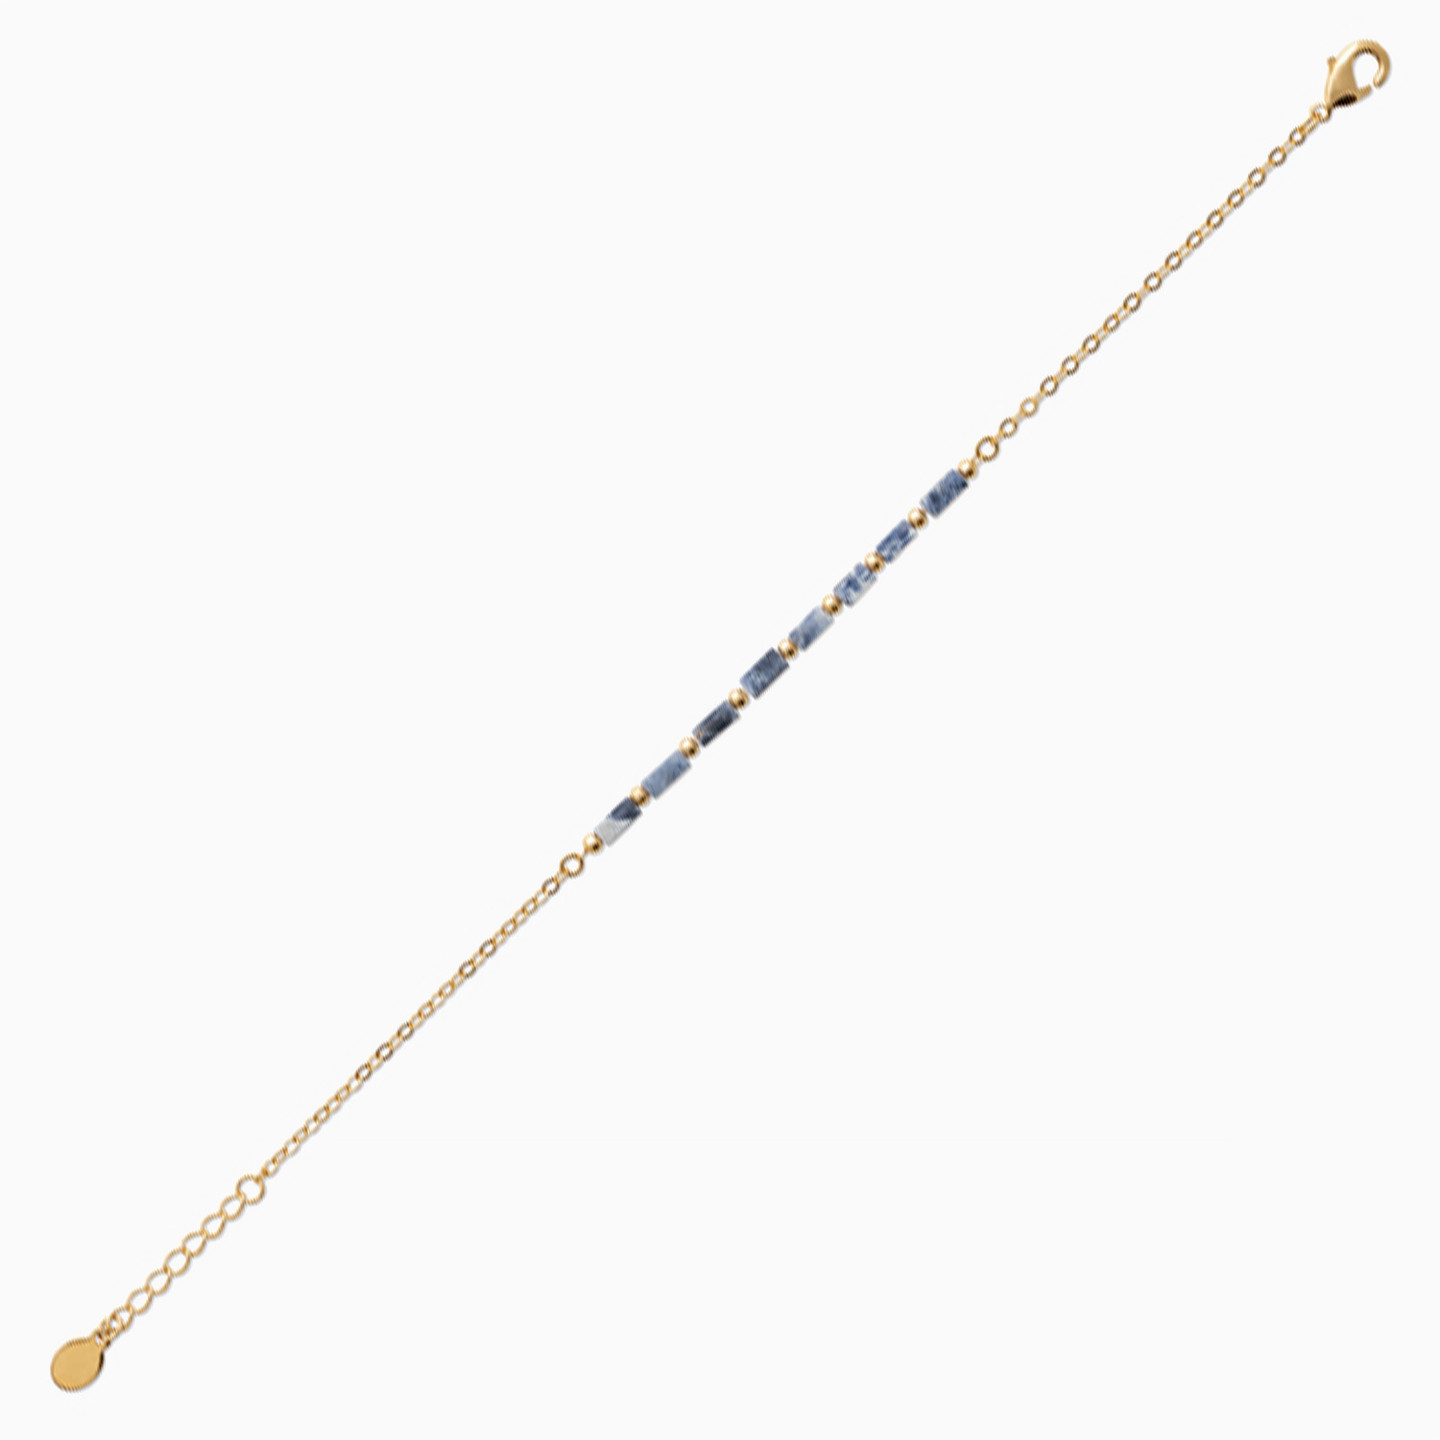 Gold Plated Colored Stones Chain Bracelet - 4